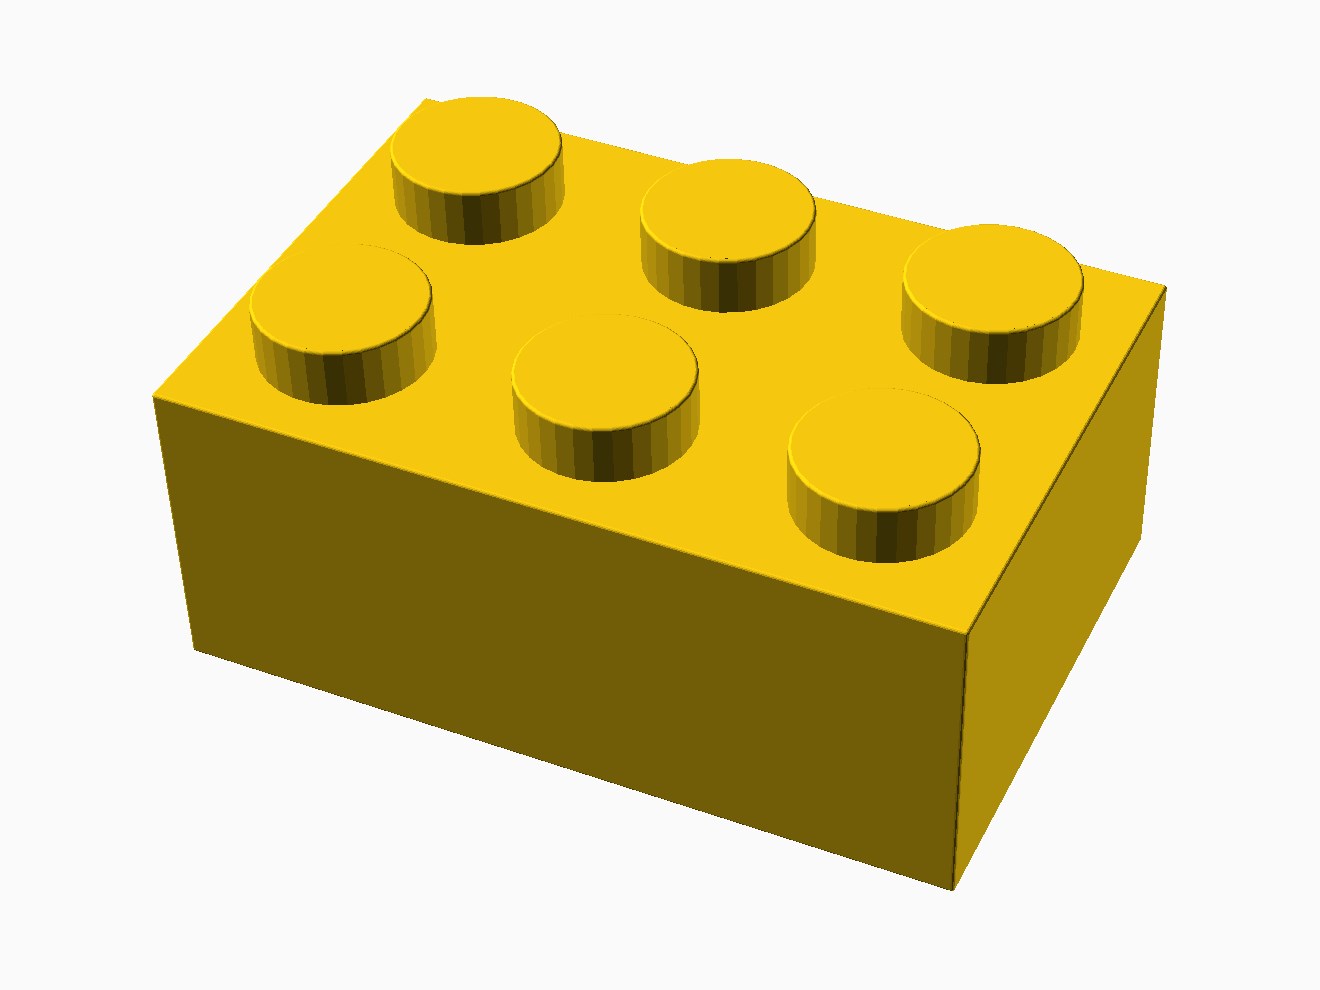 3D printable model of a LEGO 3x2 Brick with standard knobs.